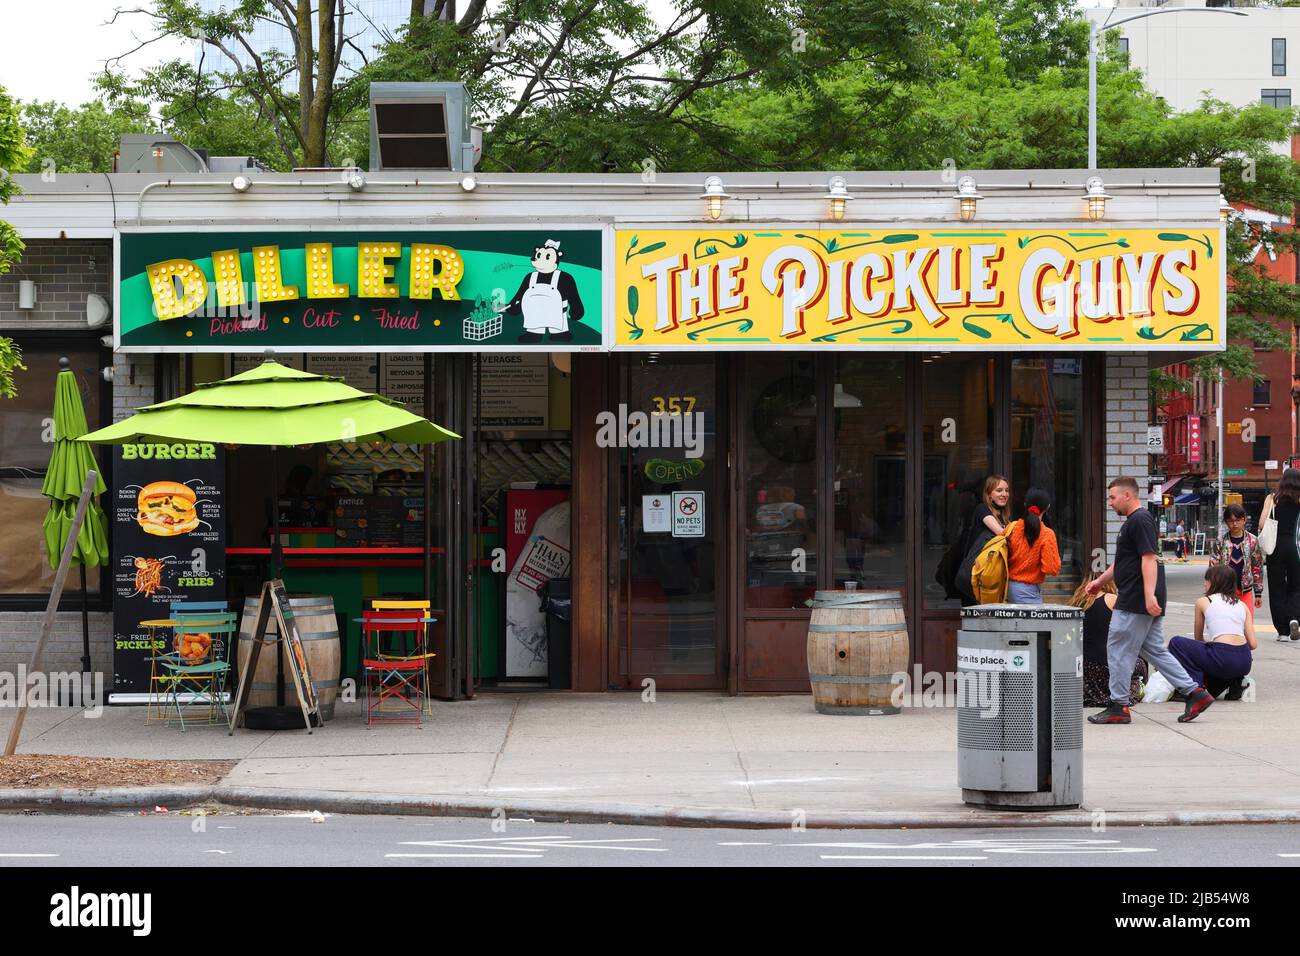 The Pickle Guys, Diller, 357 Grand St, New York, NYC storefront photo of a pickle shop, and a kosher vegan eatery in the Lower East Side. Stock Photo